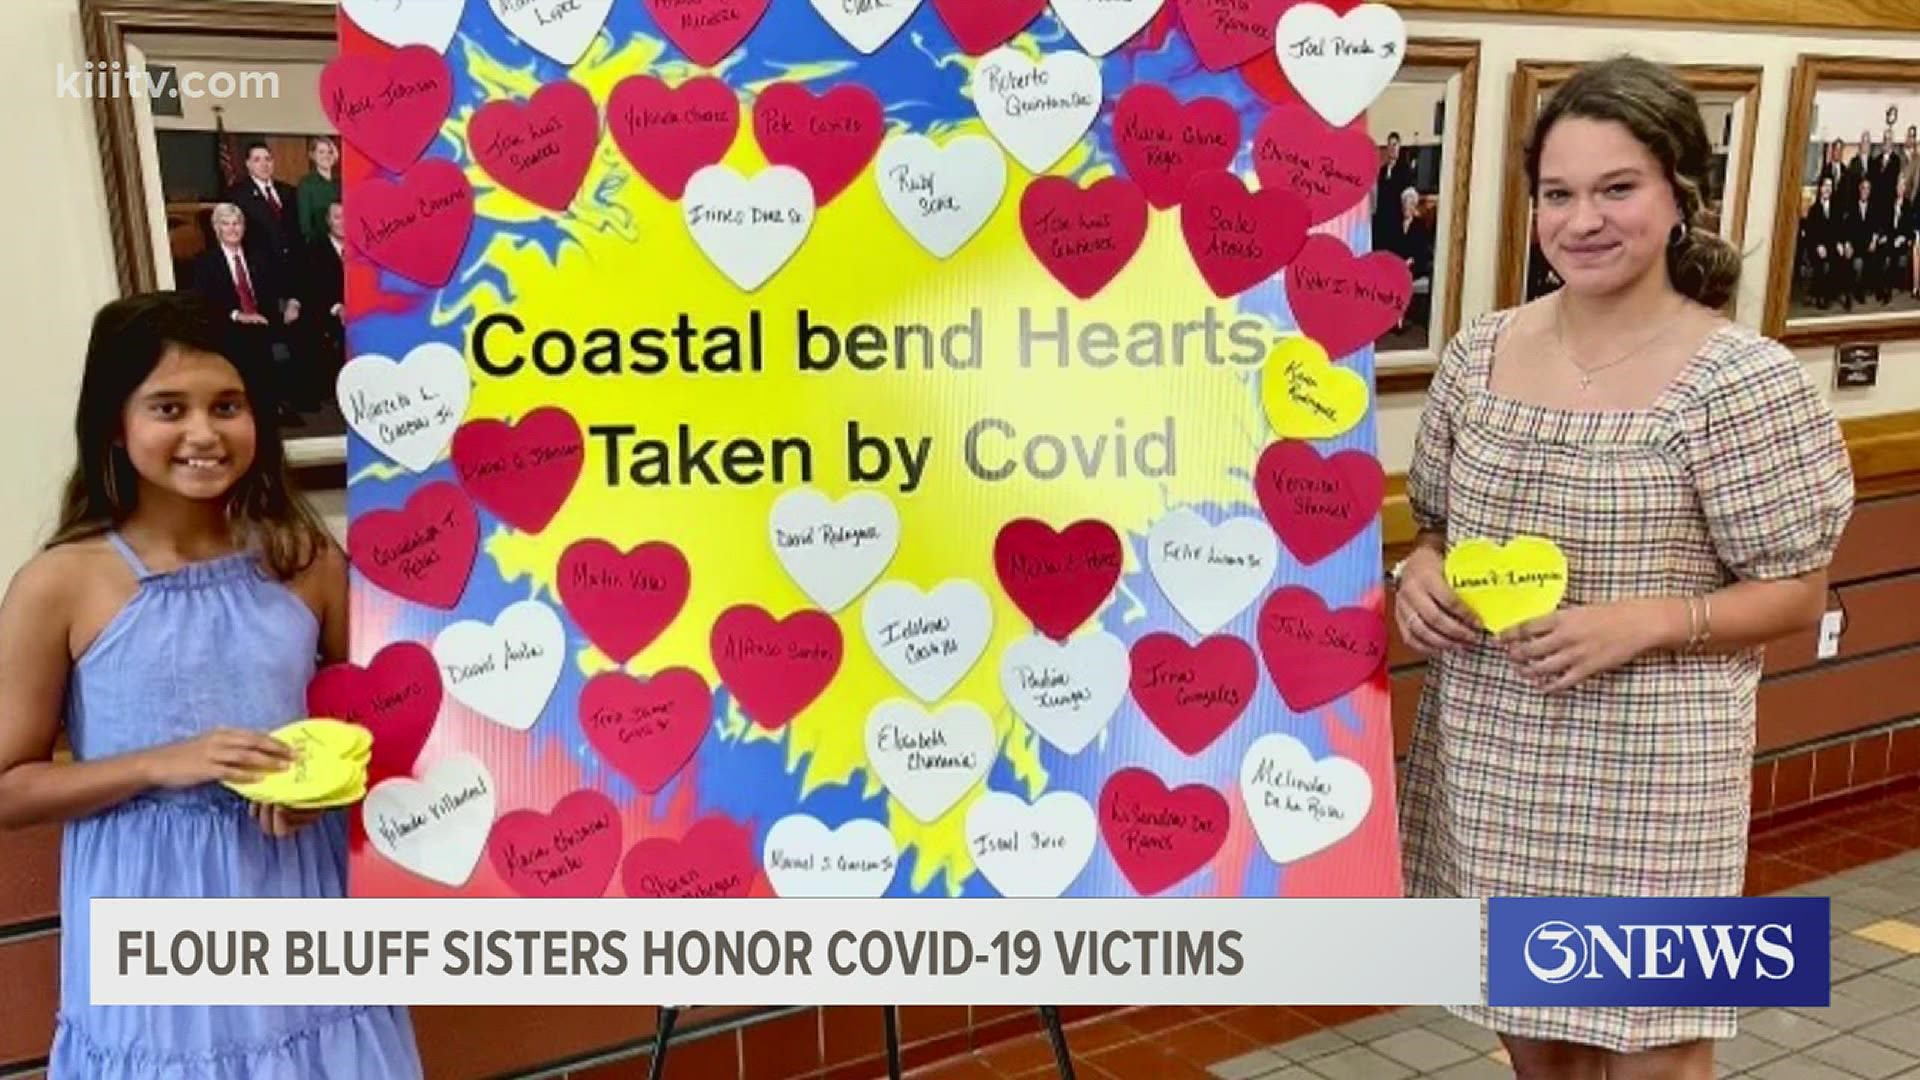 After losing their grandfather to COVID-19, 13-year-old Kylie and her 10-year-old sister Kendall created a way to honor Coastal Bend victims.